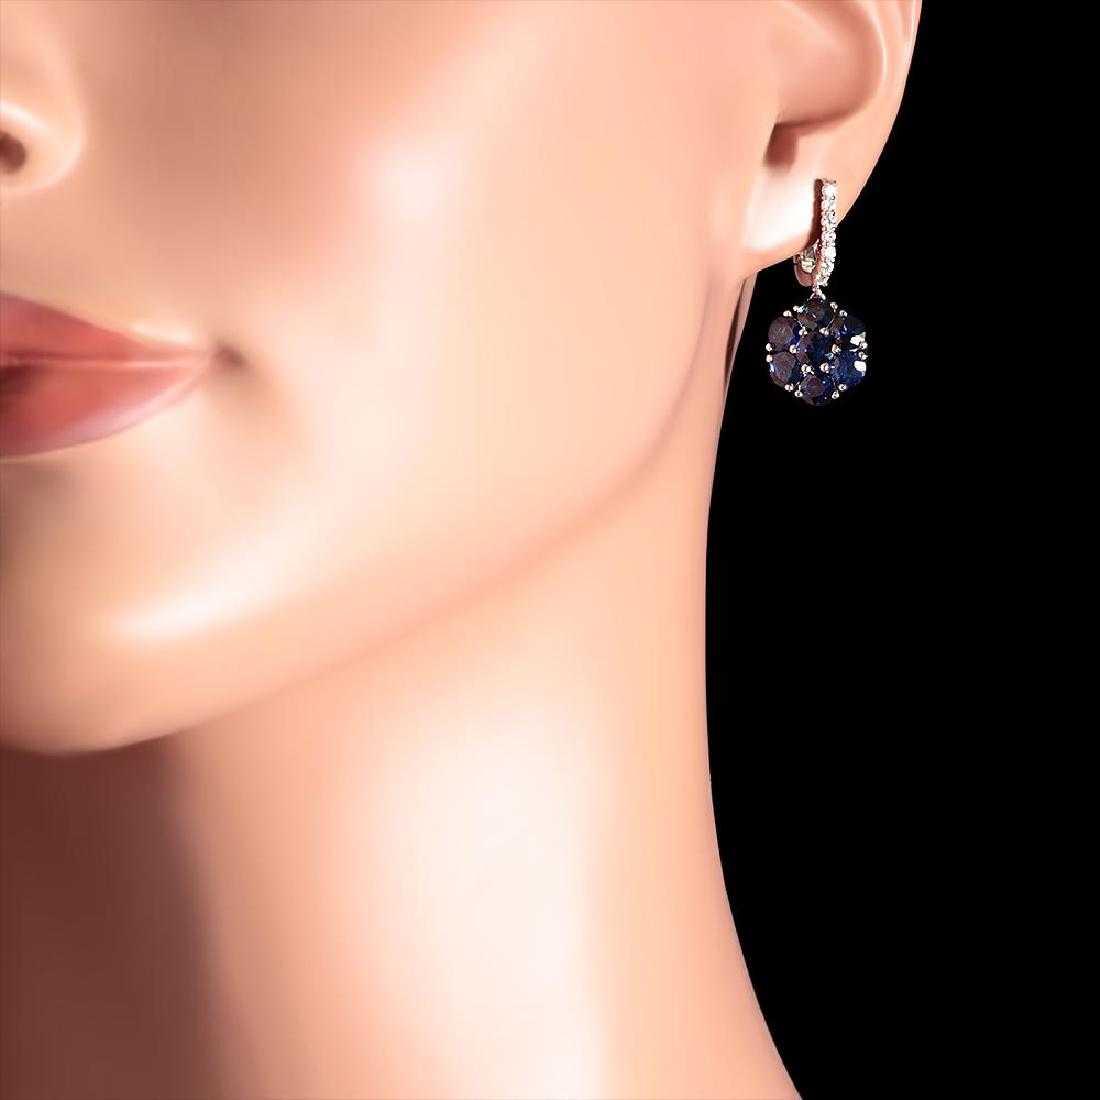 14K White Gold 5.72ct Sapphire and 0.45ct Diamond Earrings